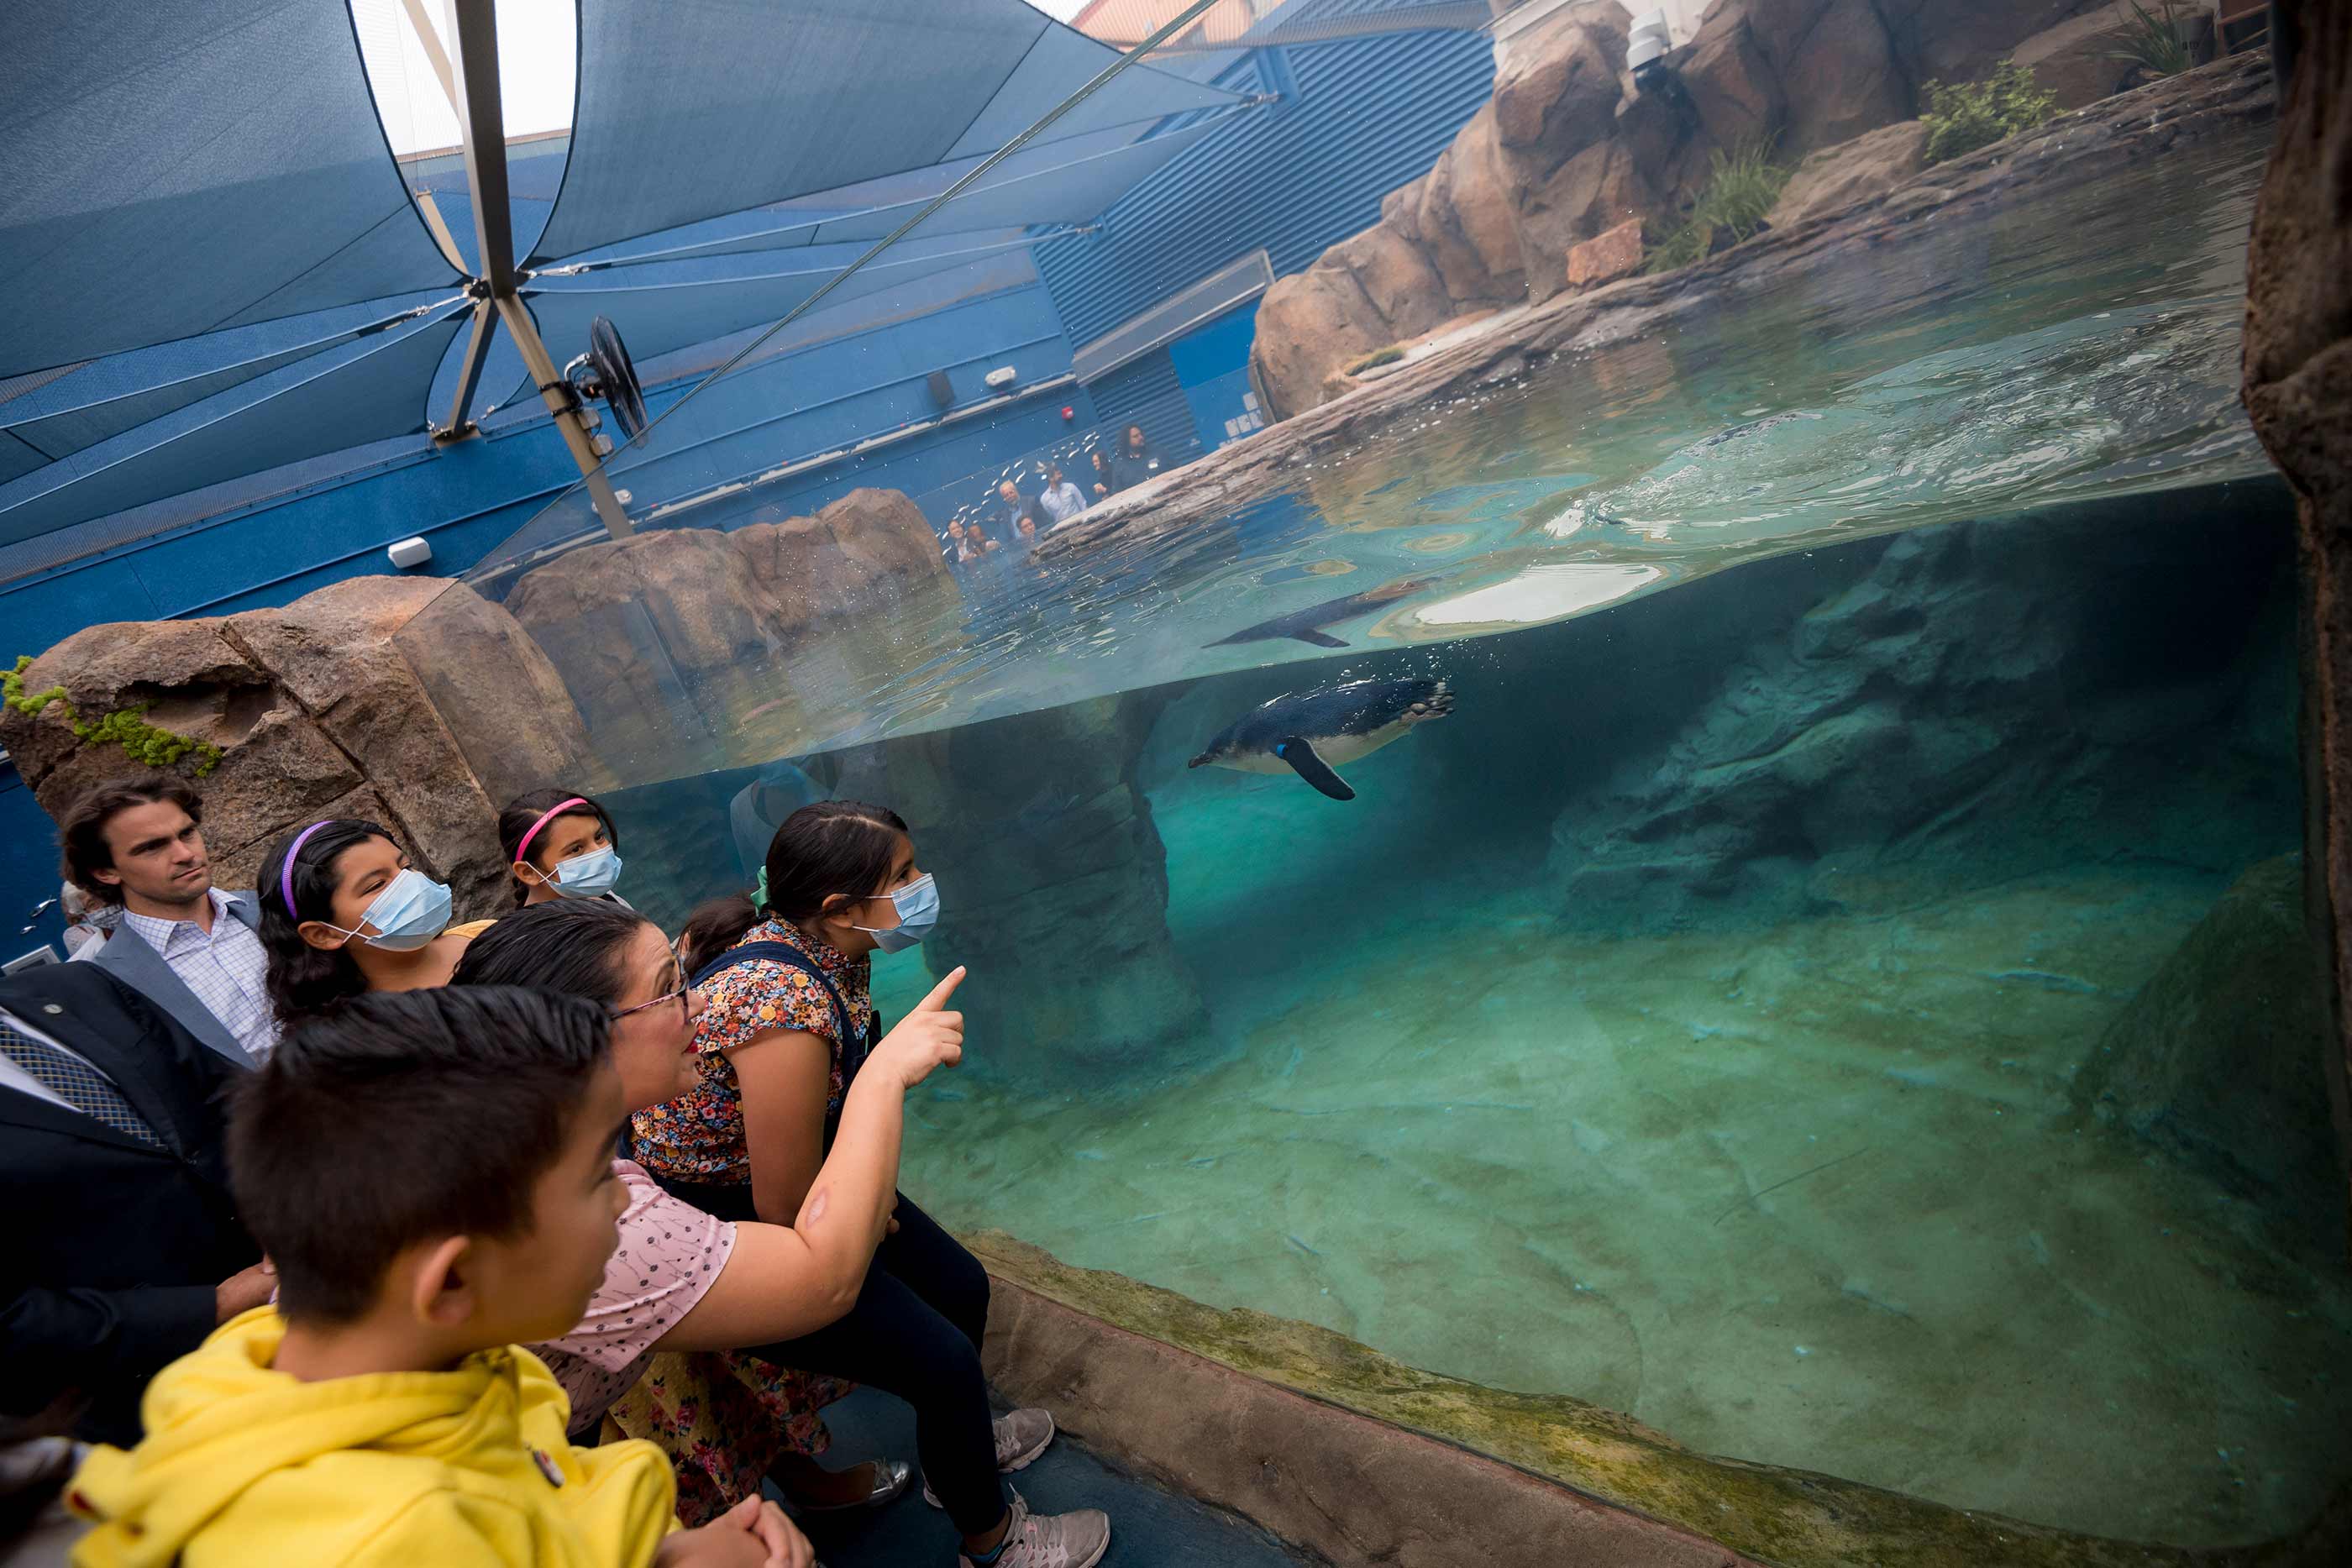 Guests watch as a penguin swims in their habitat on the opening day of the exhibit.